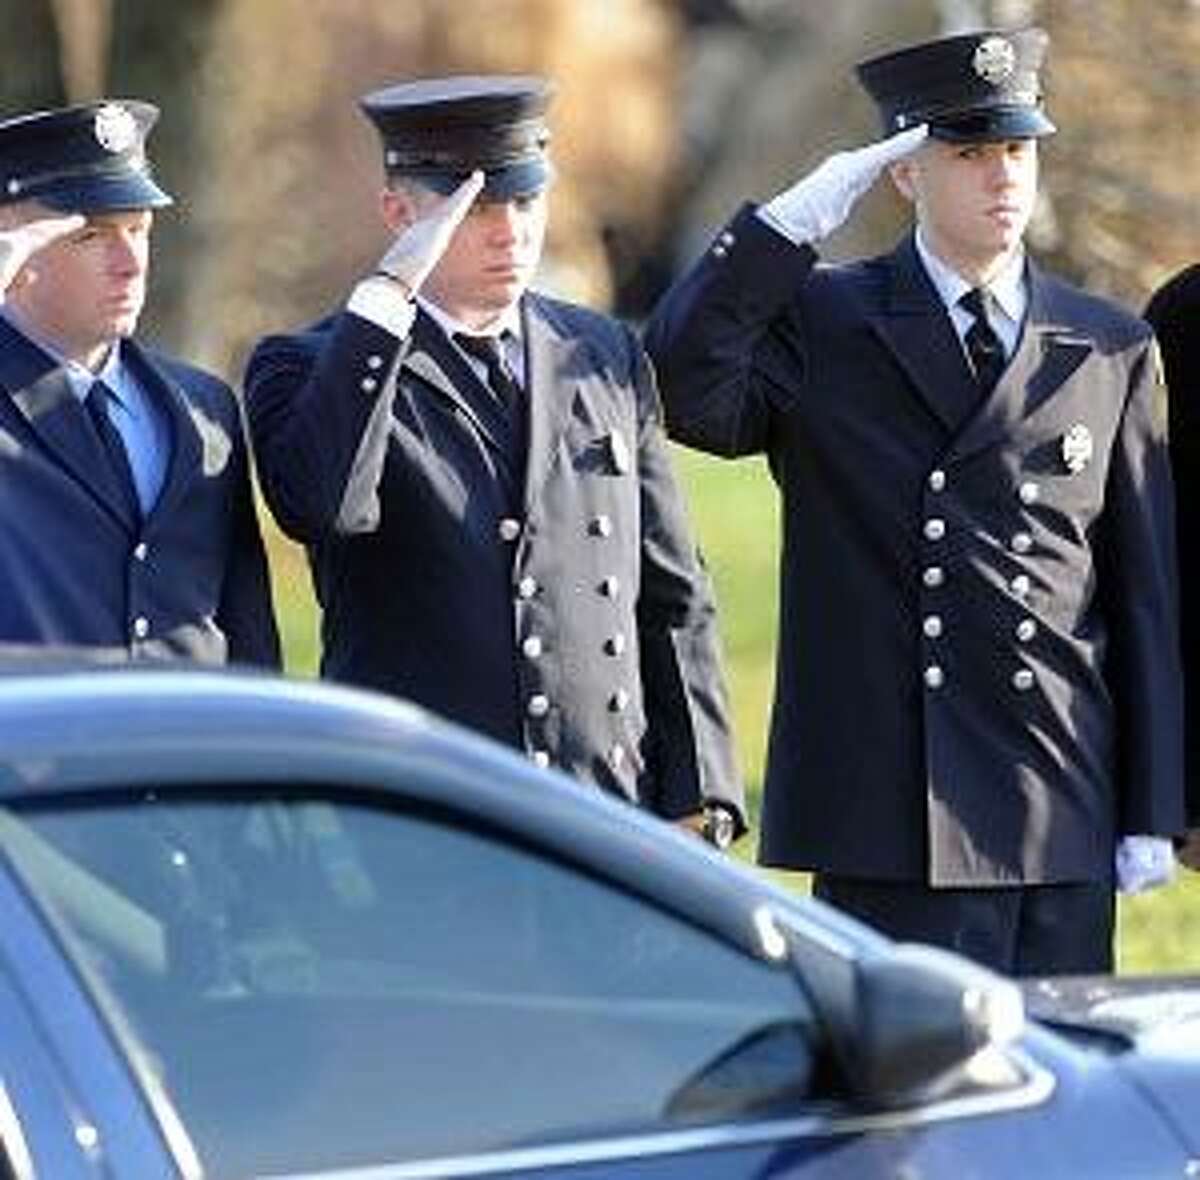 Connecticut firefighters from around the state stand as an honor guard during the funeral for Daniel Barden , 7, of at the St. Rose of Lima Roman Catholic Church in Newton, Conn. Wednesday, December 19, 2012, who was killed by a gunman that also claimed the lives of 6 adults and 19 other children at the Sandy Hooky Elementary School shooting Friday, December 14, 2012. Photo by Peter Hvizdak / New Haven Register